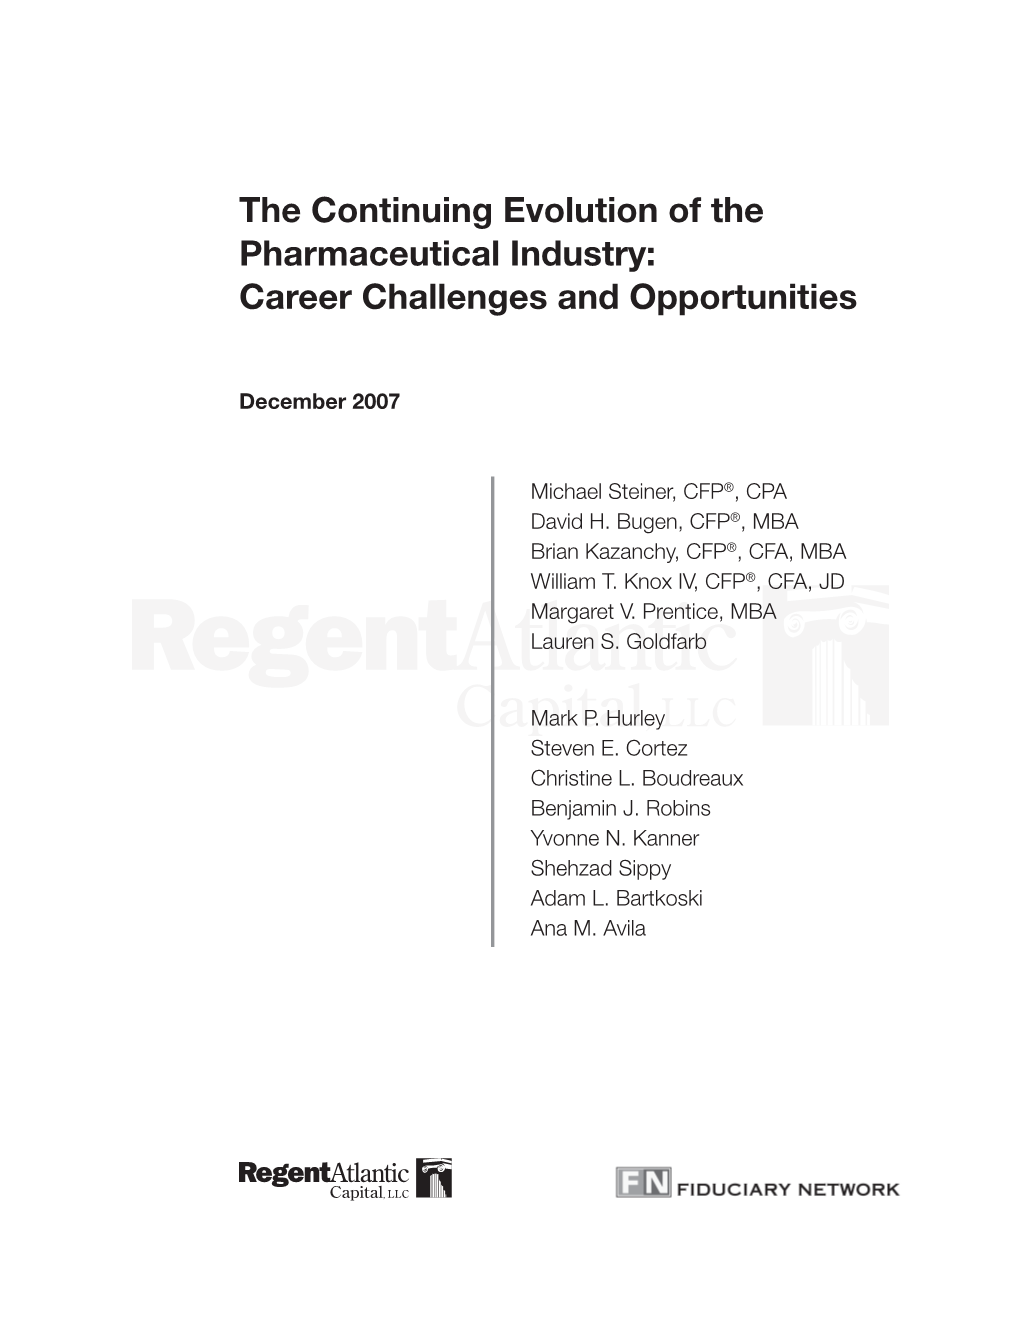 The Continuing Evolution of the Pharmaceutical Industry: Career Challenges and Opportunities